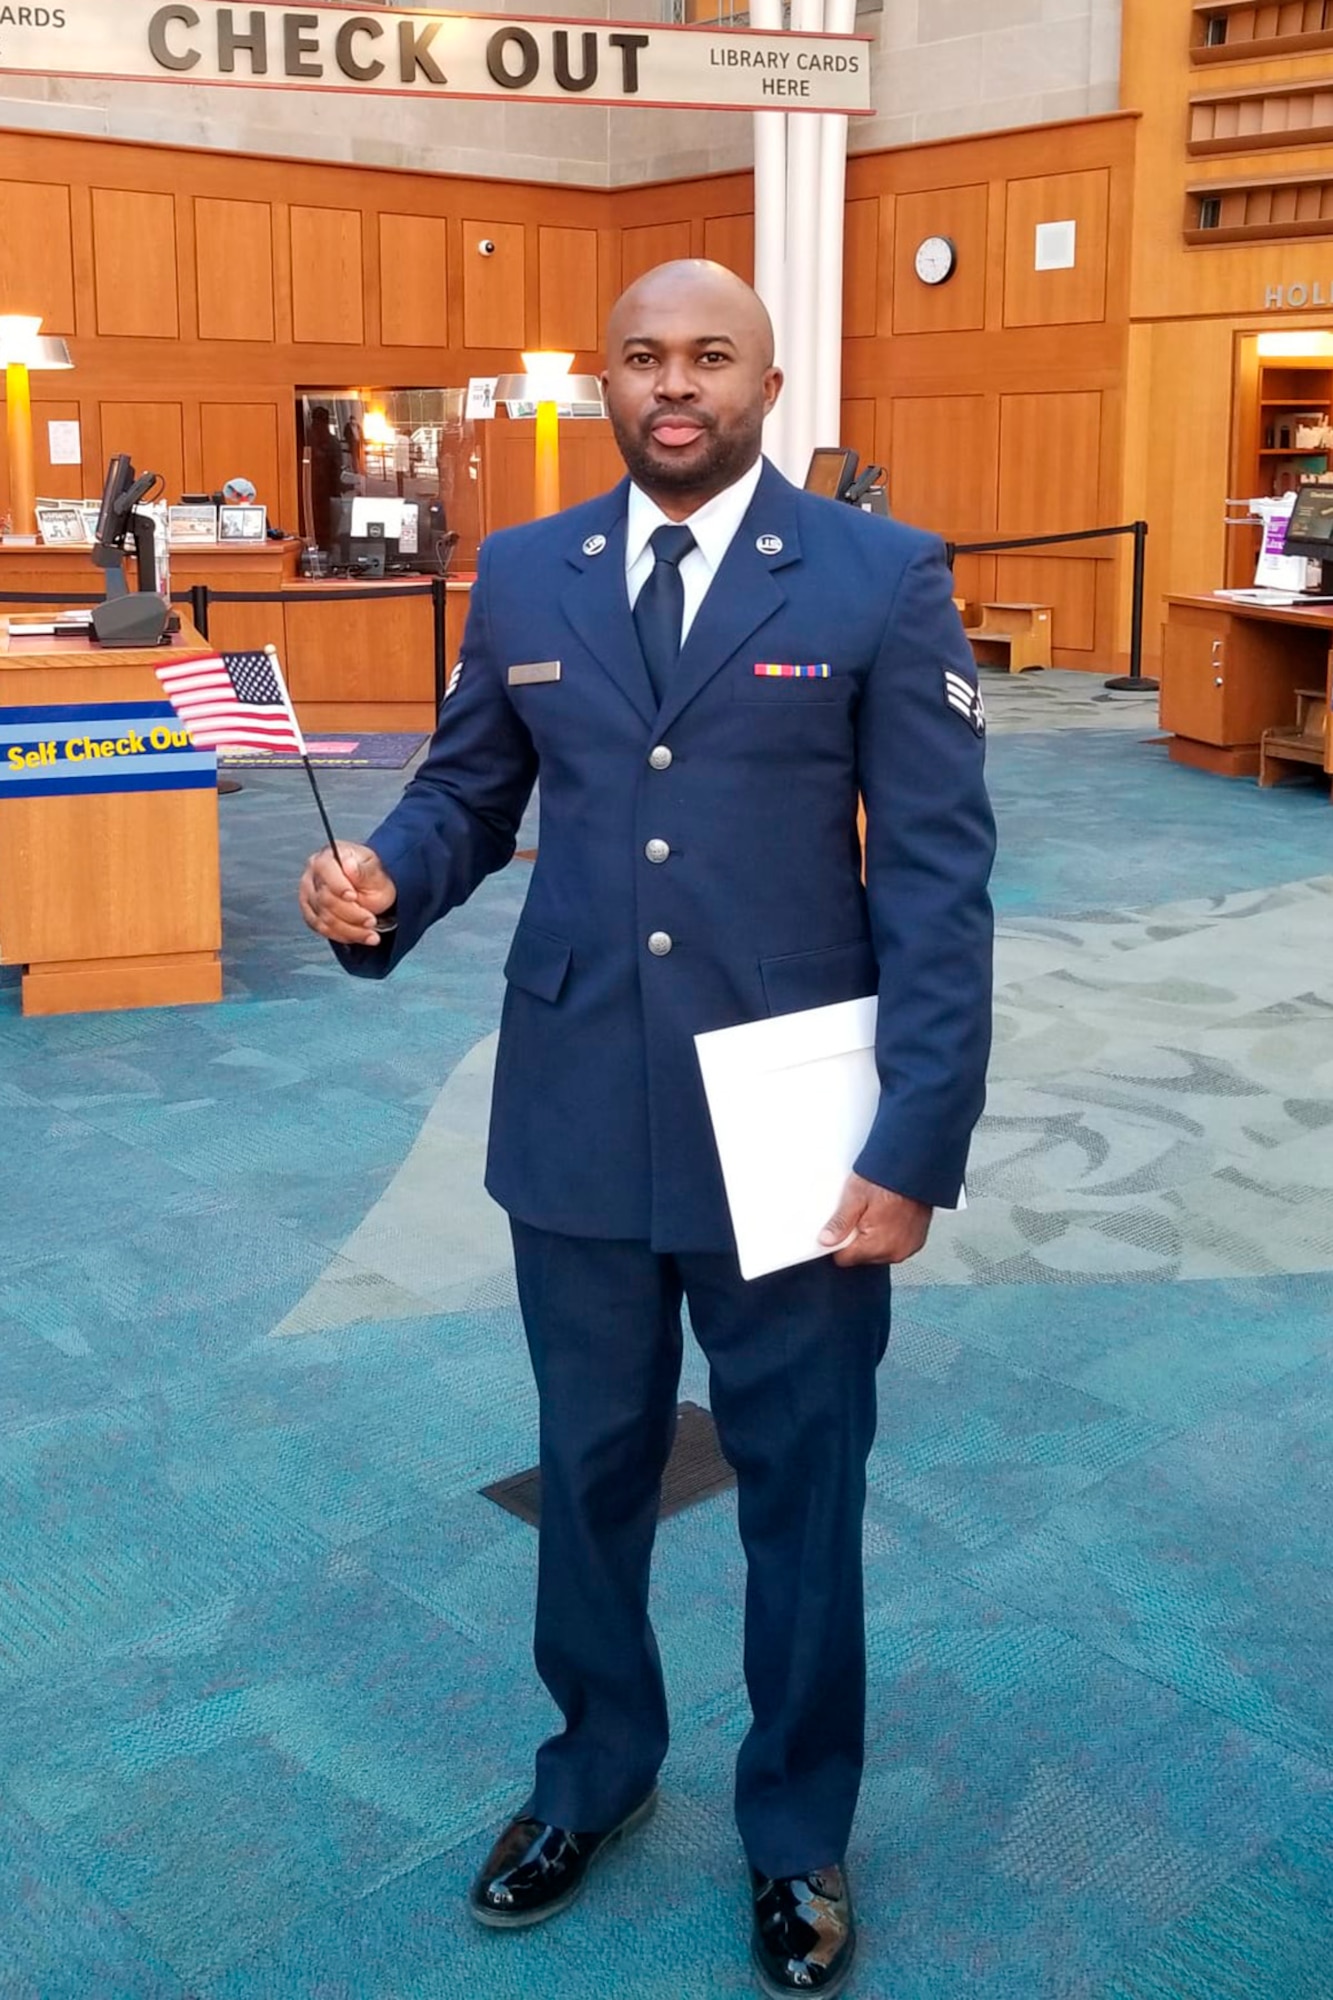 Senior Airman Gentle Onuora, 434th Civil Engineer Squadron, pest management specialist poses for a photo with an American flag after officially becoming a United States citizen. Born in Nigeria, Onuora moved to the United States in 2015. On October 13, 2021 he obtained U.S. citizenship through his military service. (Courtesy photo/SrA Onuora)